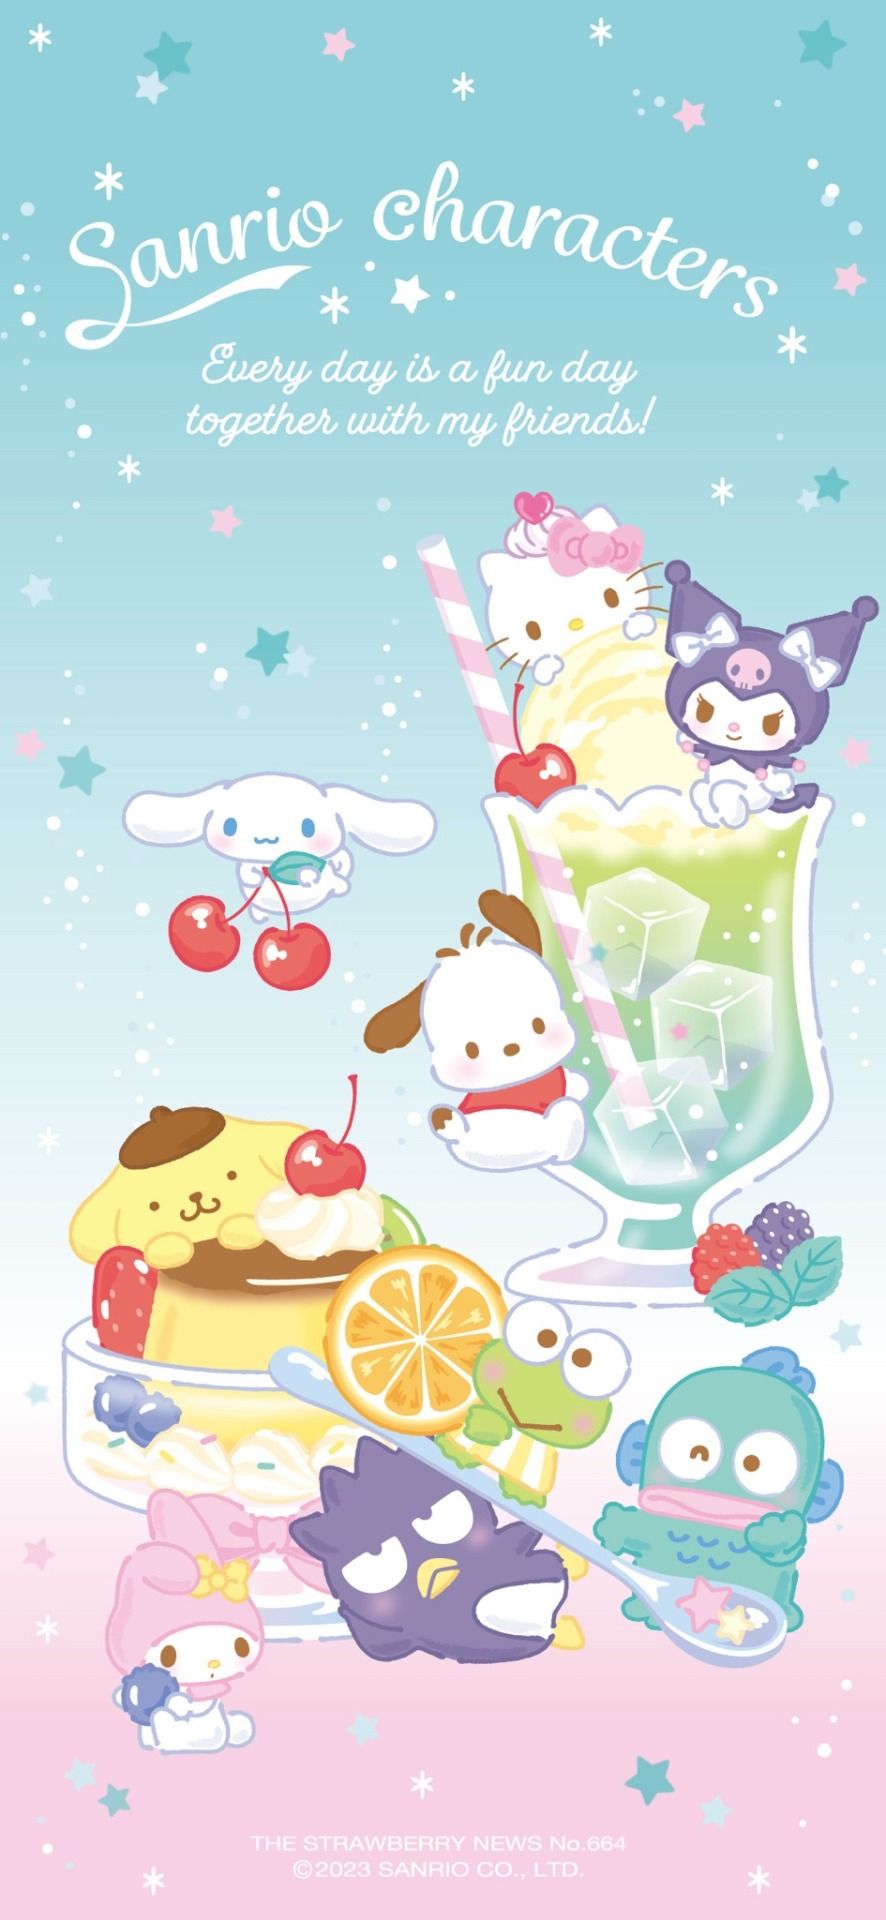 Sanrio Characters Every day is a fun day together with my friends! - Sanrio